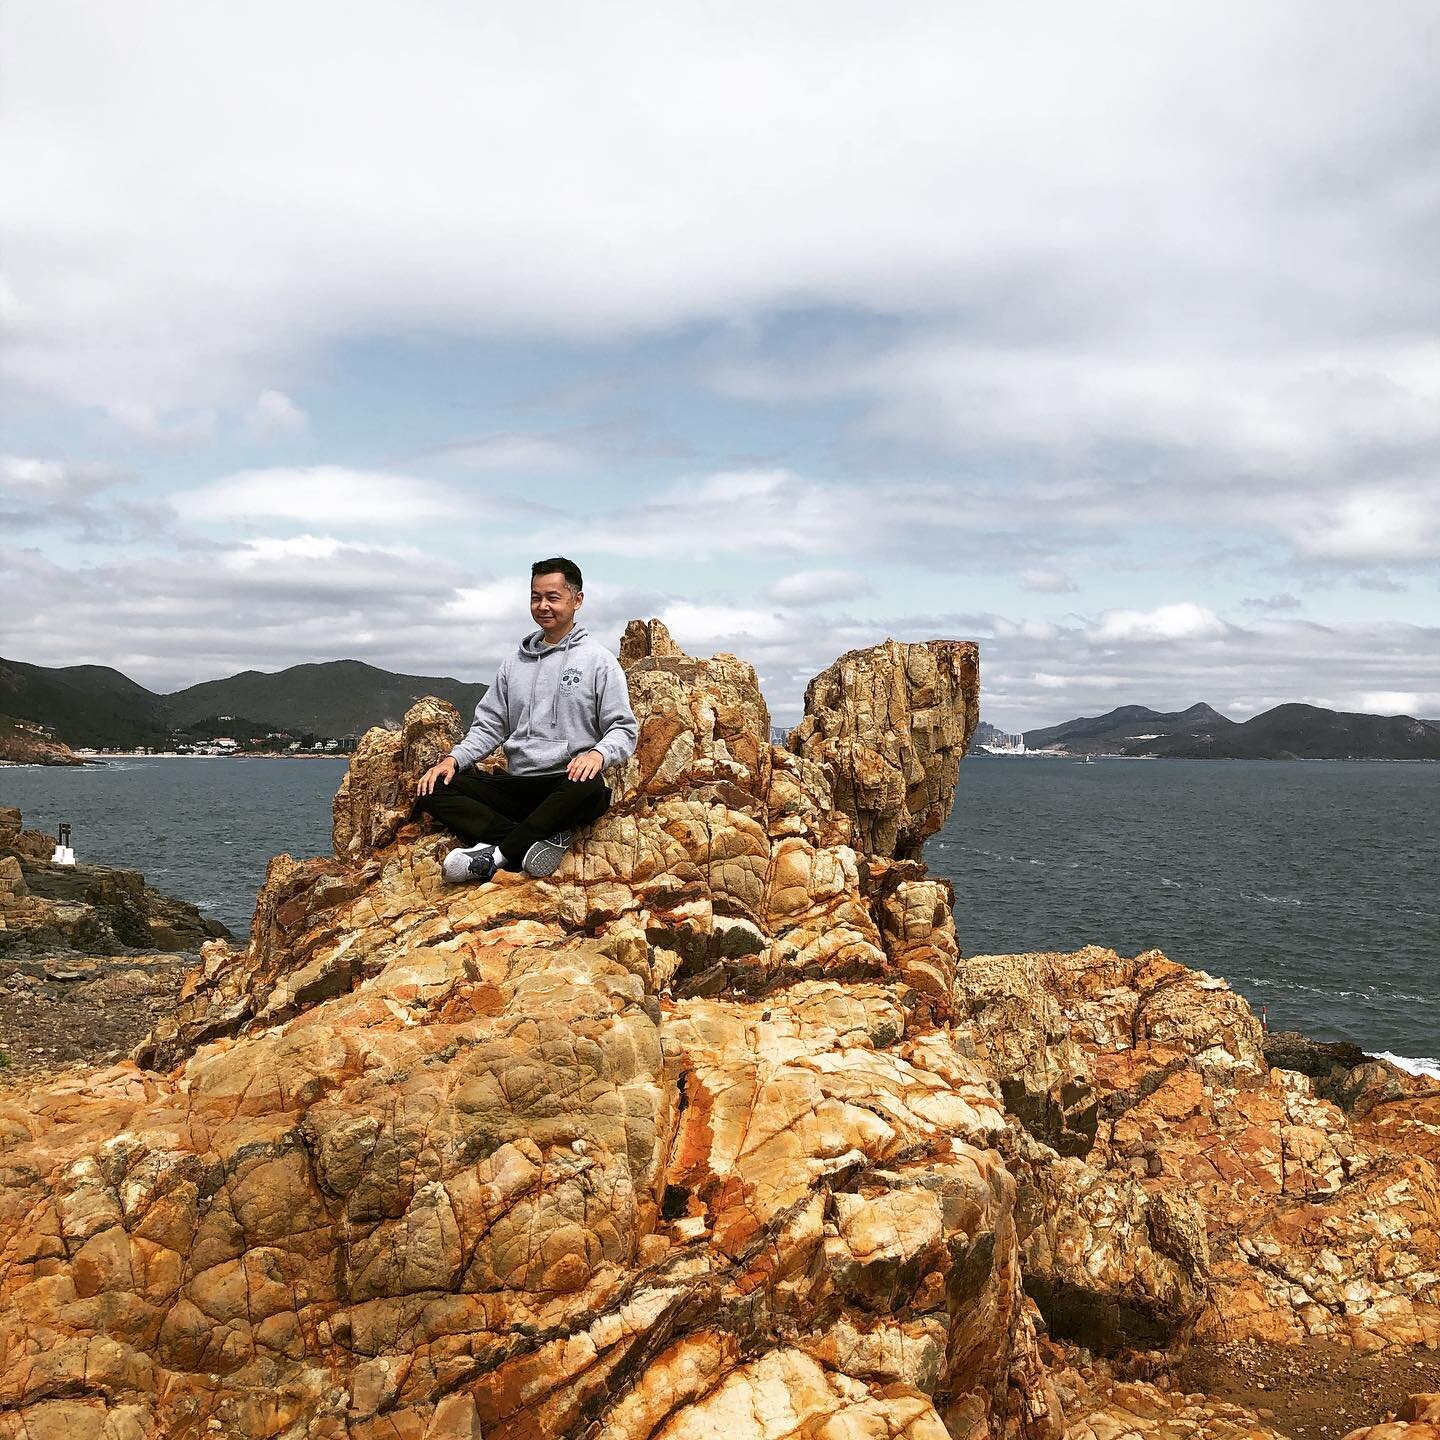 Taking a moment to reconnect to the Earth. It&rsquo;s easy to forget that Hong Kong was once a font of volcanic activity and the rocks bear witness to the massive stresses that formed them. Quieting the mind and absorbing into land reminds us that th